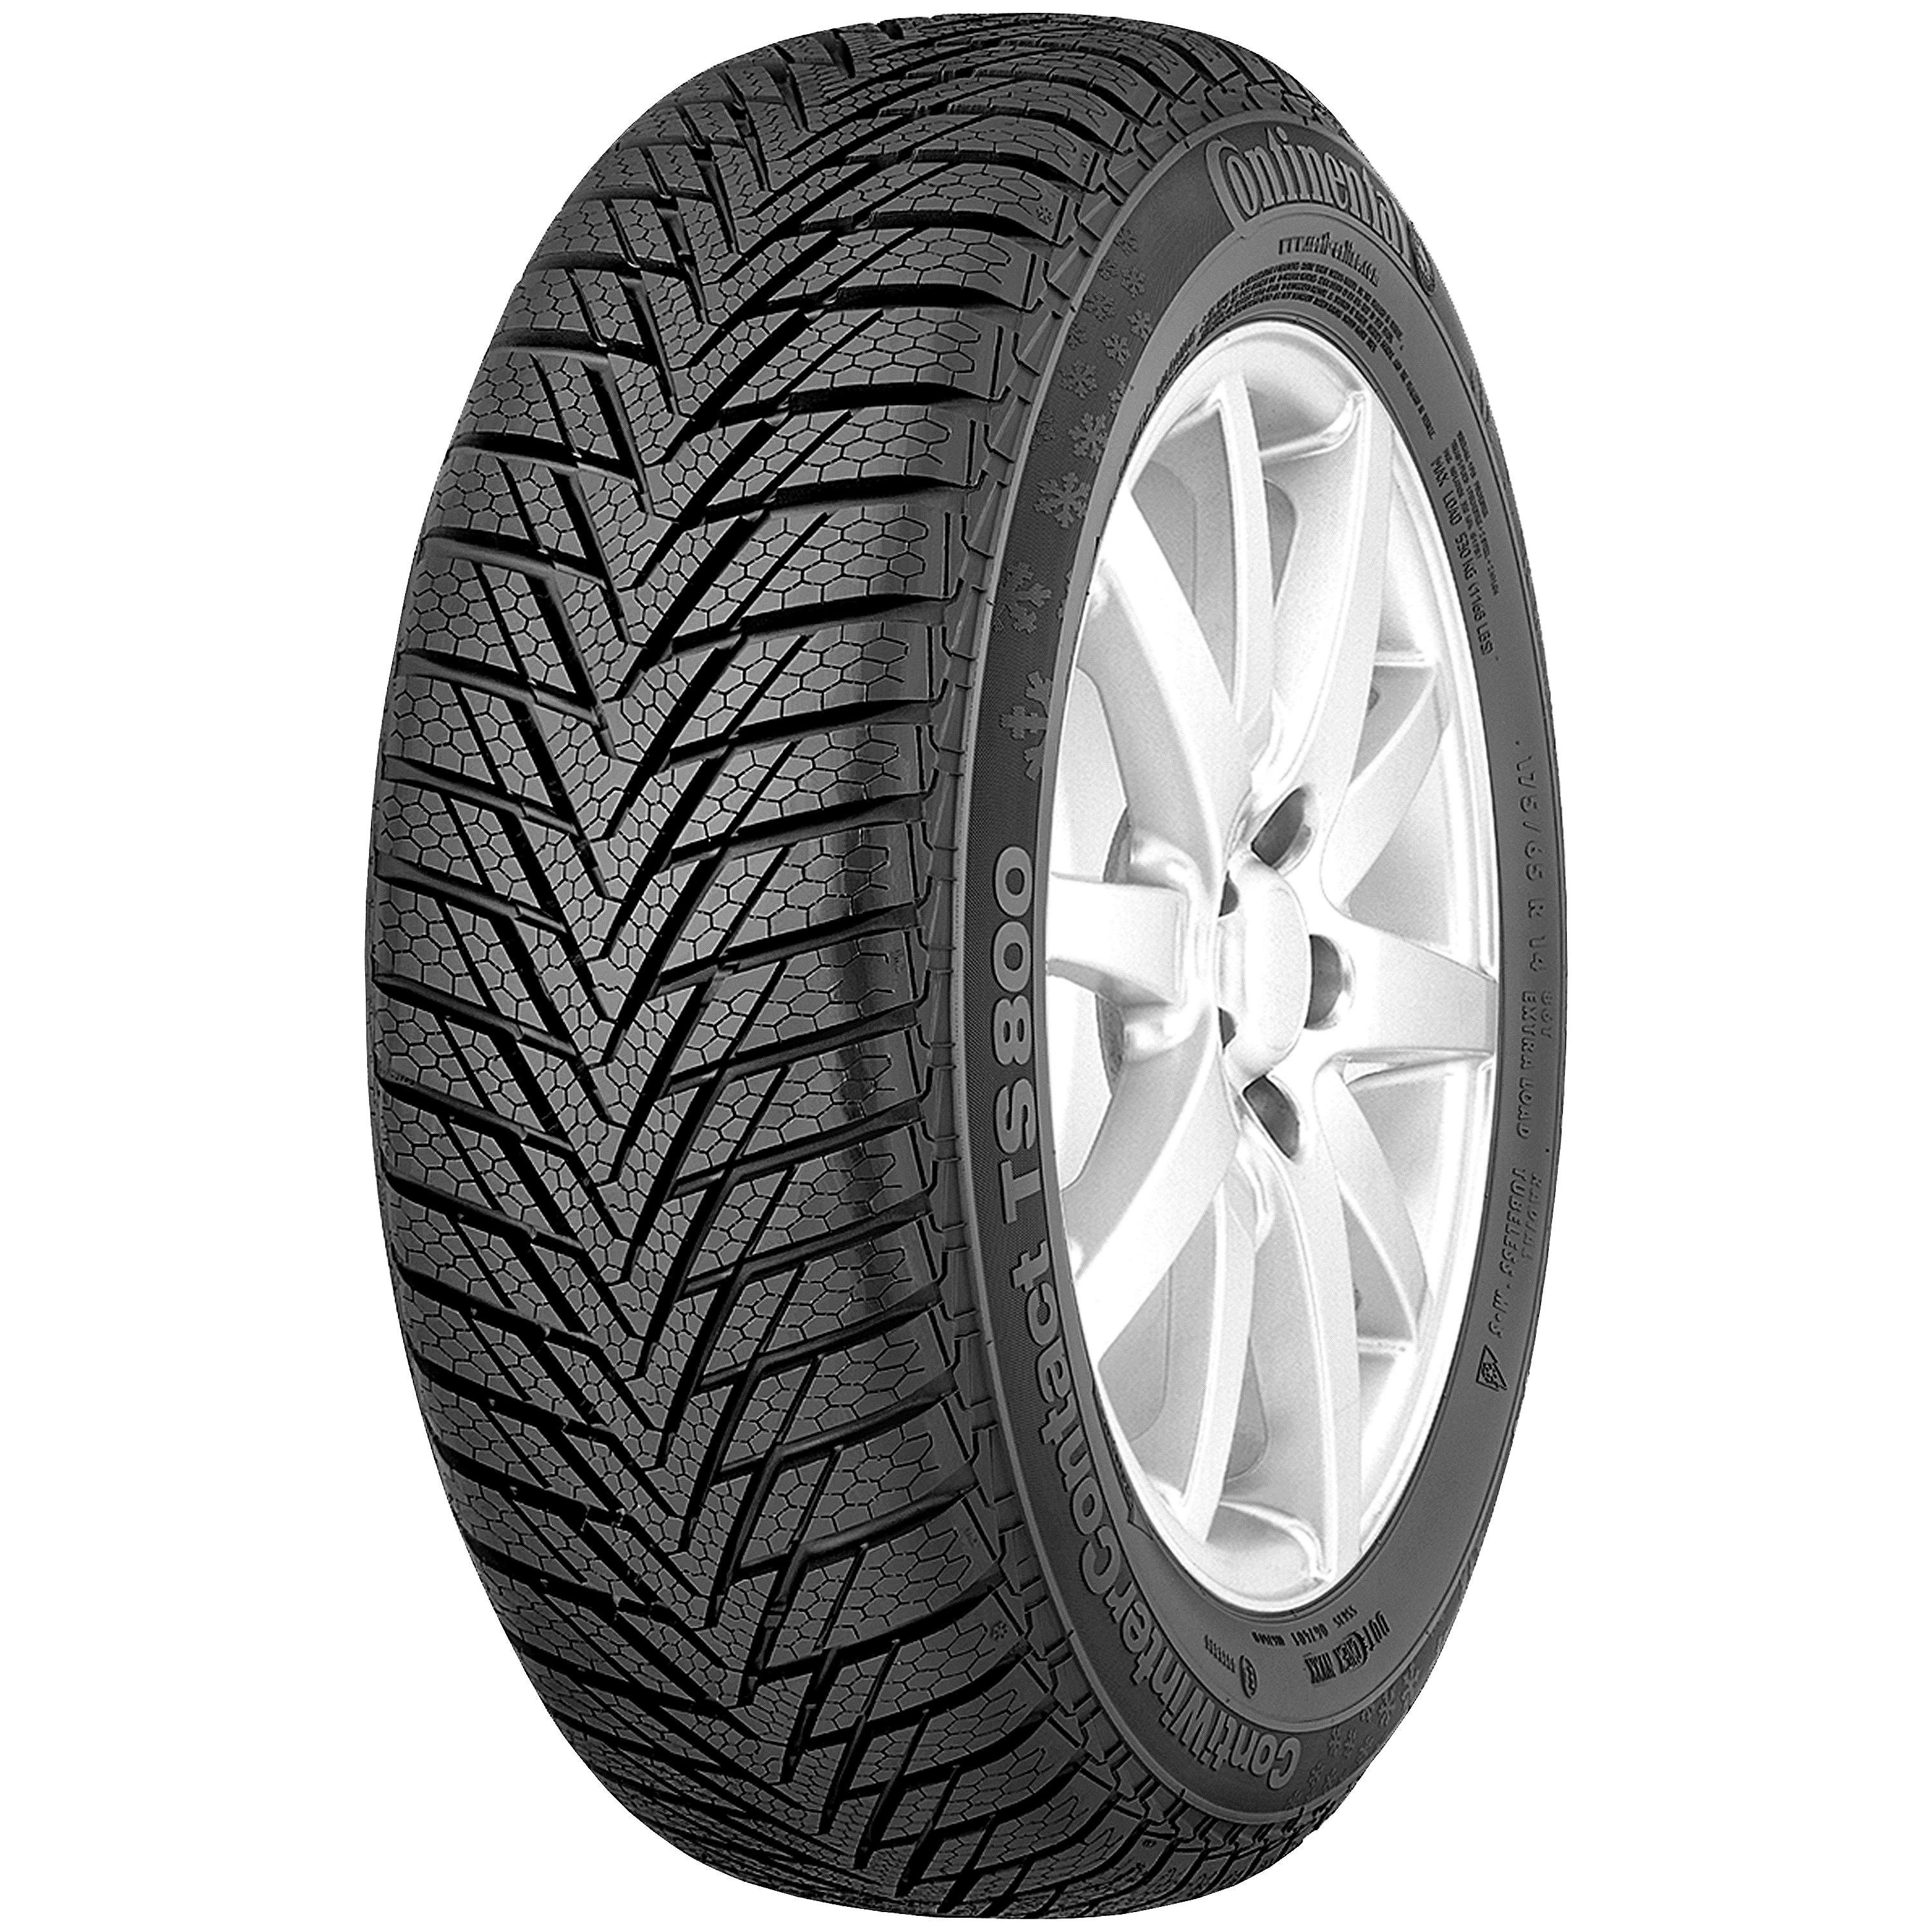 ContiWinterContact TS 800: winter category tire compact the Tailor-made for